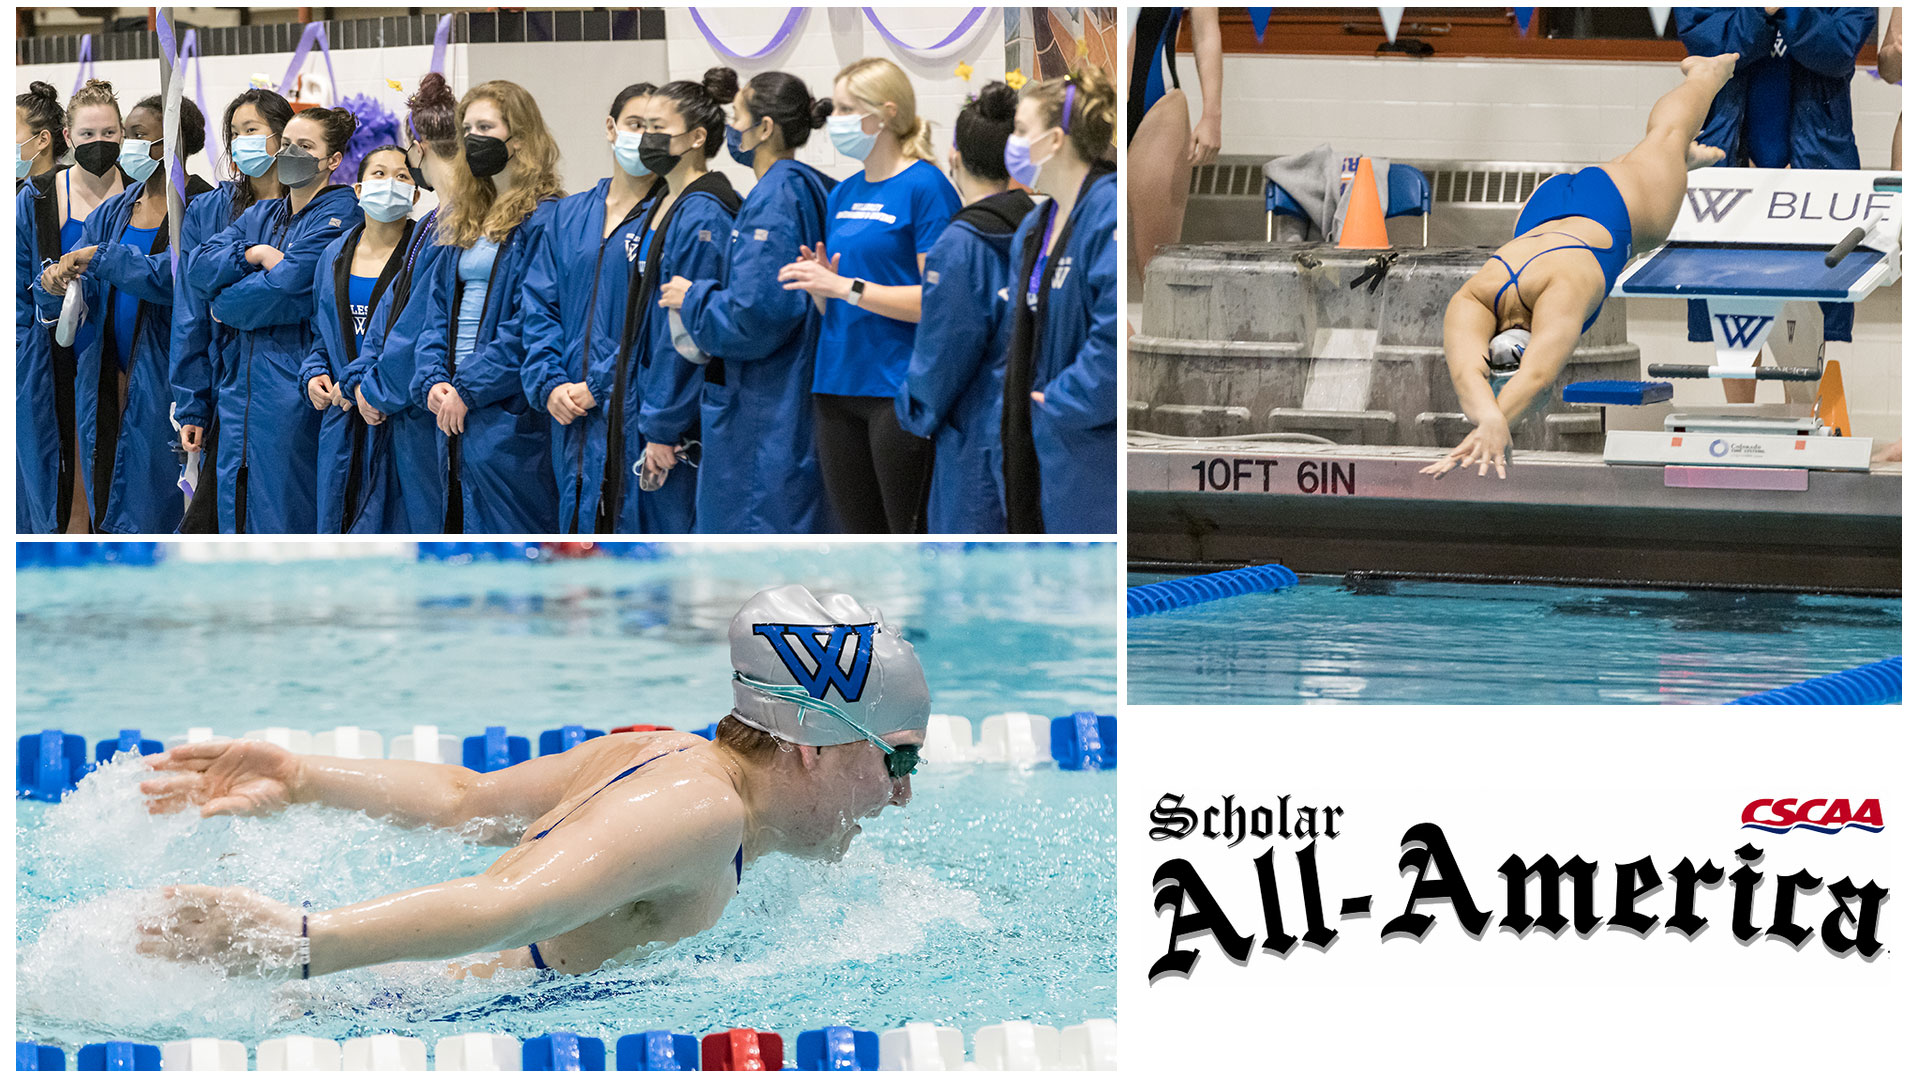 images of the Wellesley team swimming, next to the pool, includes cscaa scholar all-america logo 